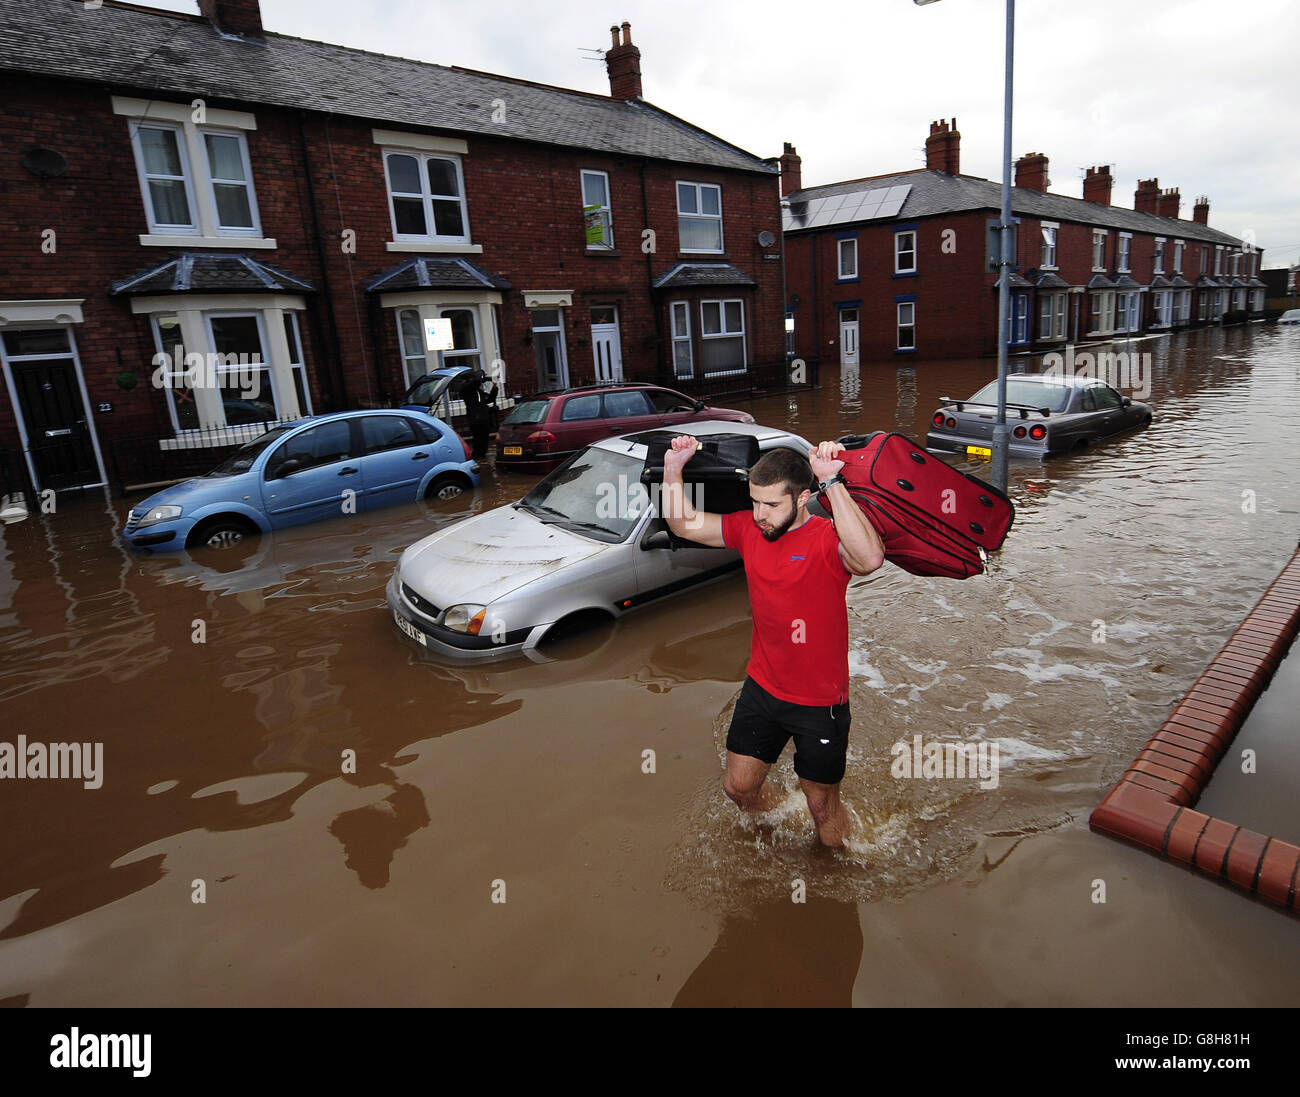 Fire and Rescue teams continue their work to bring people out of flooded homes in Carlisle following heavy rains over he weekend. Stock Photo